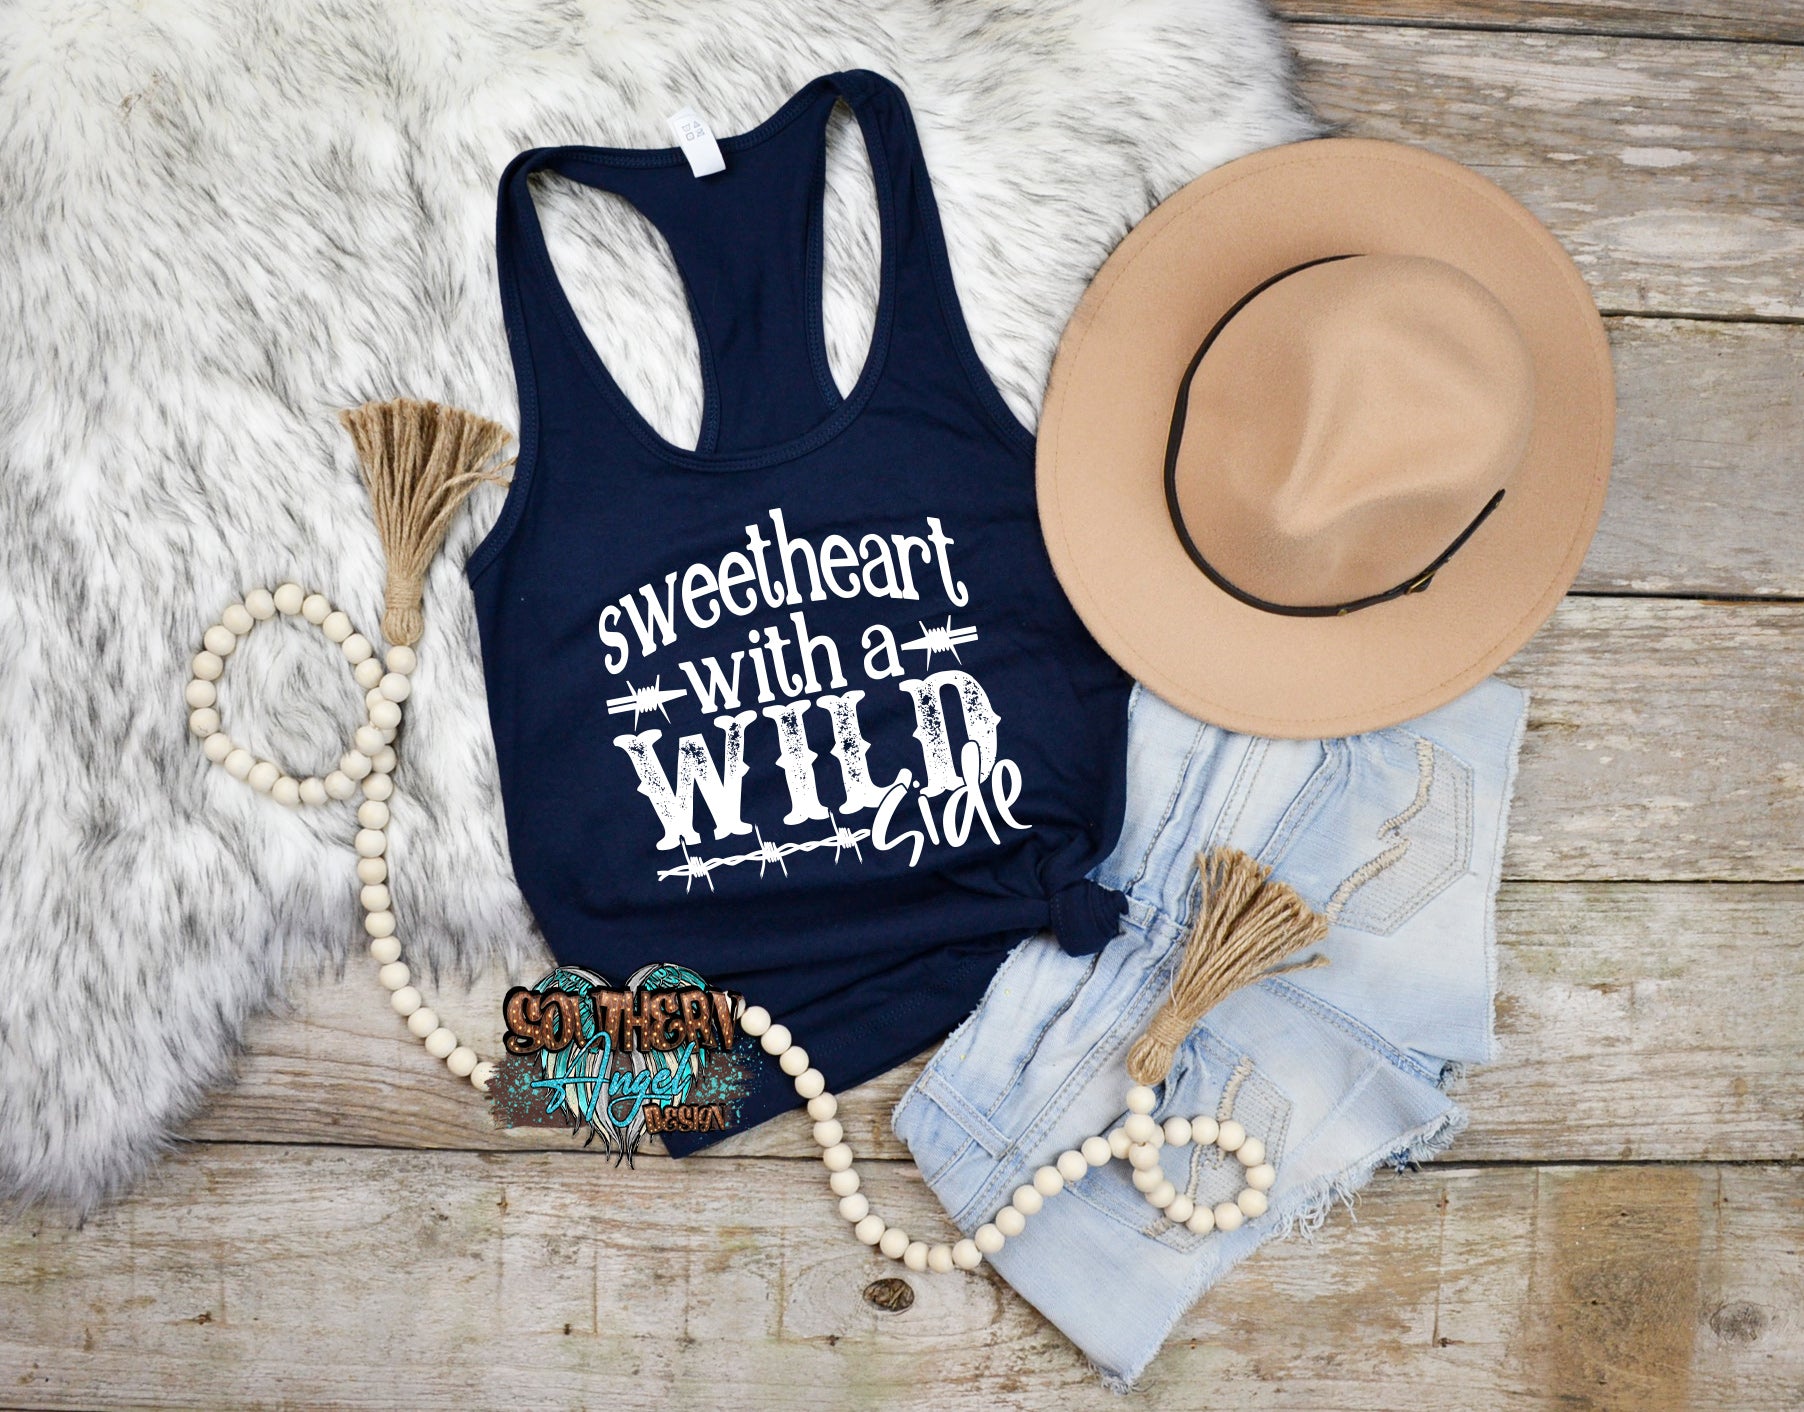 Gray Sweetheart With A Wild Side image_b38d3ea2-d690-4caf-b0c6-7c79edf694eb.jpg sweetheart-with-a-wild-side Concert & Rodeo